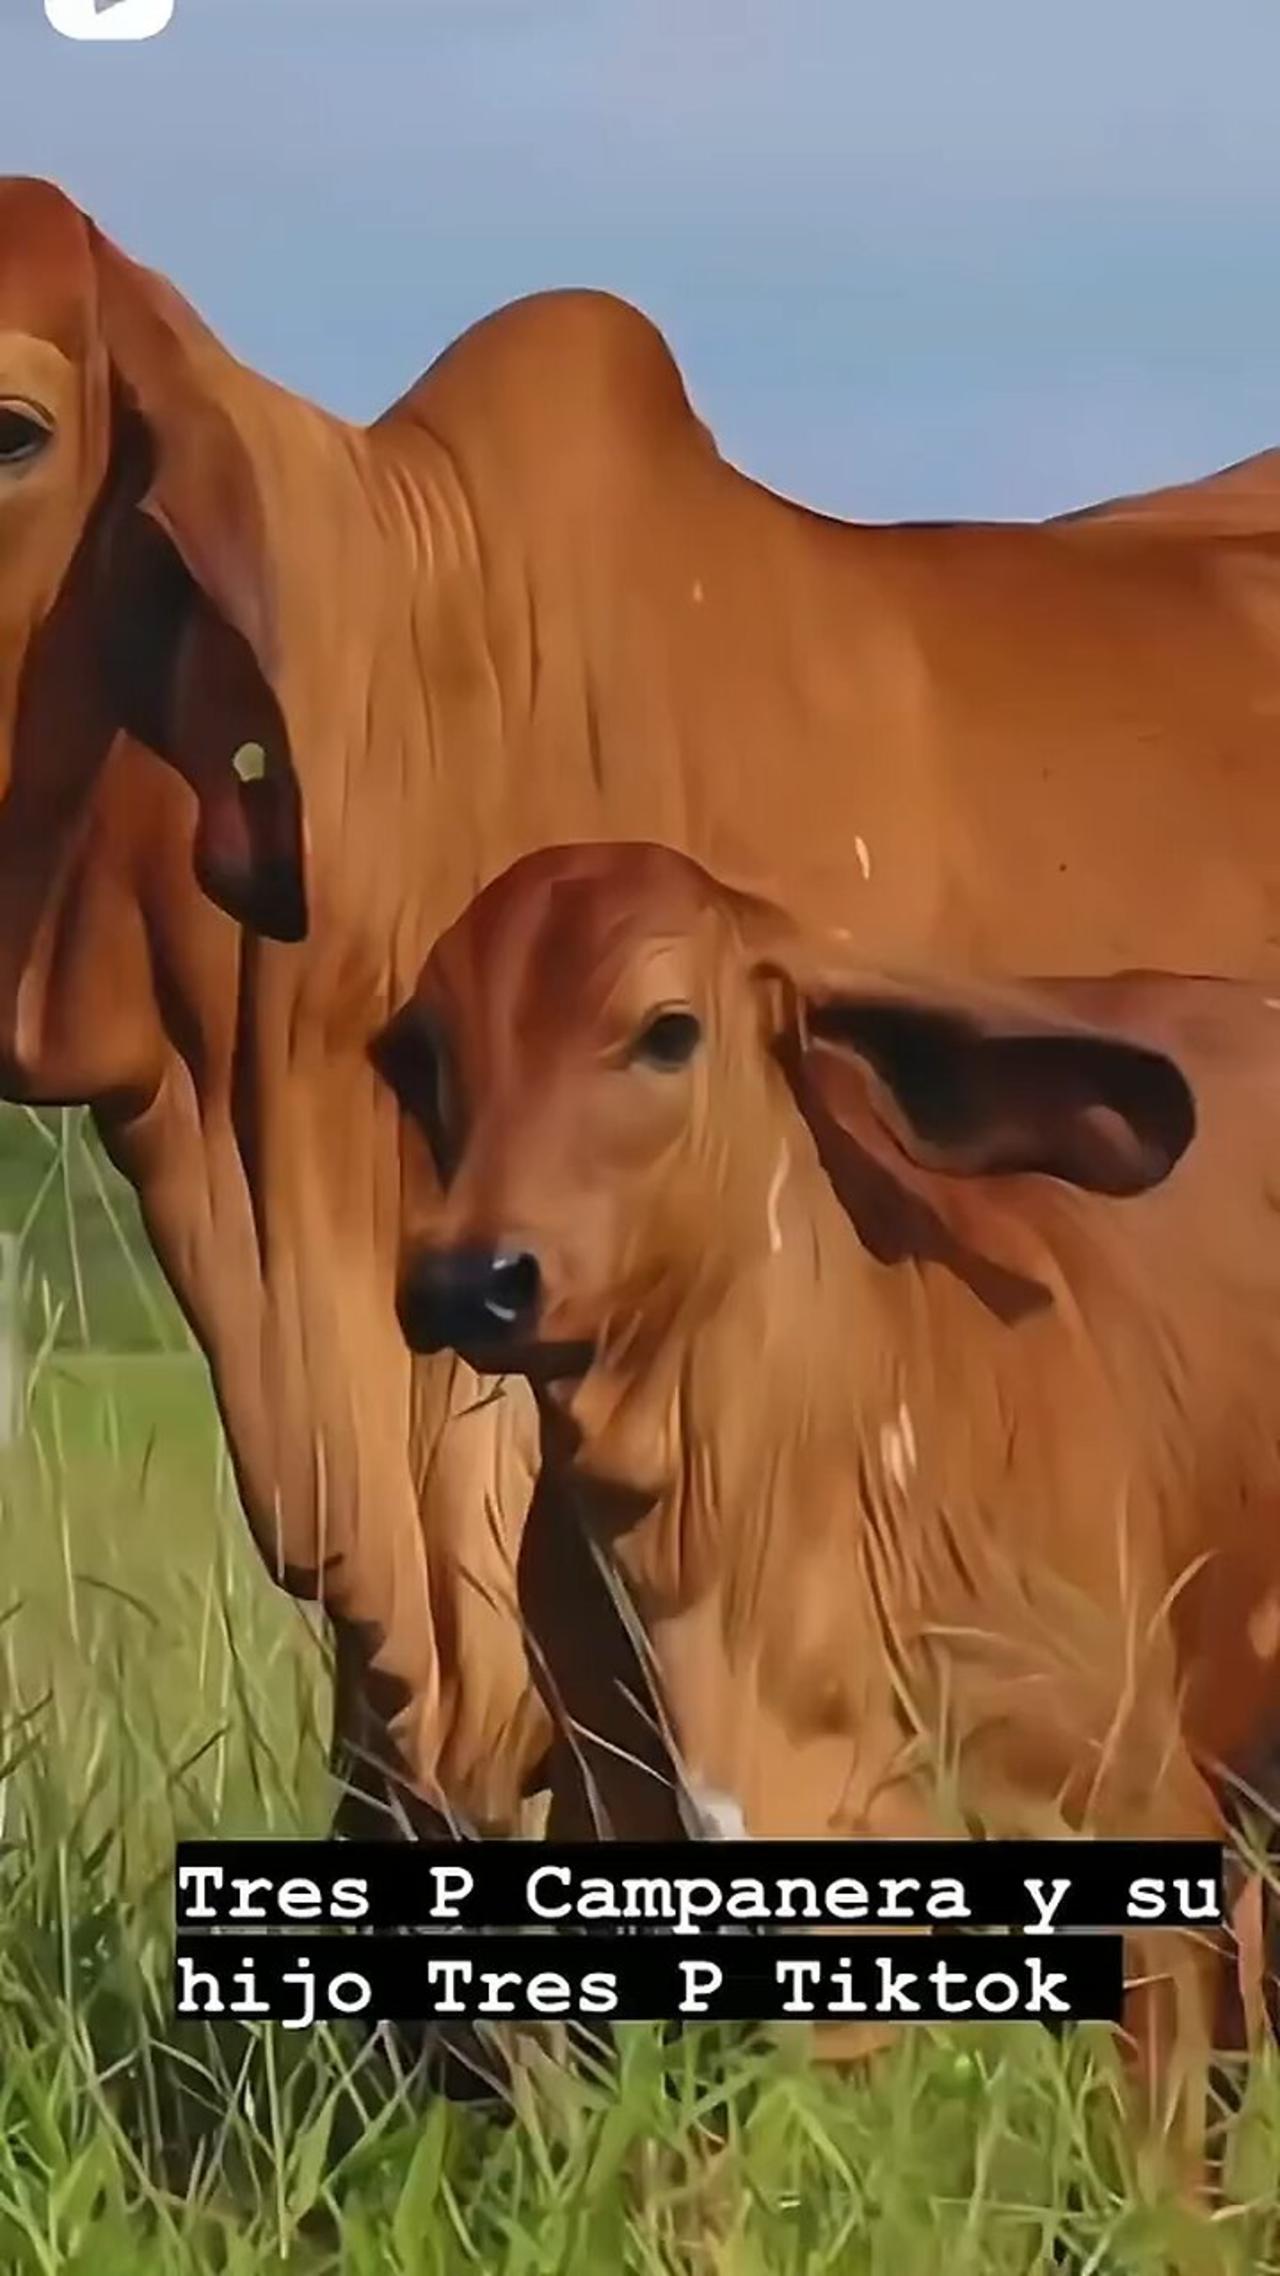 Beautiful cow and baby